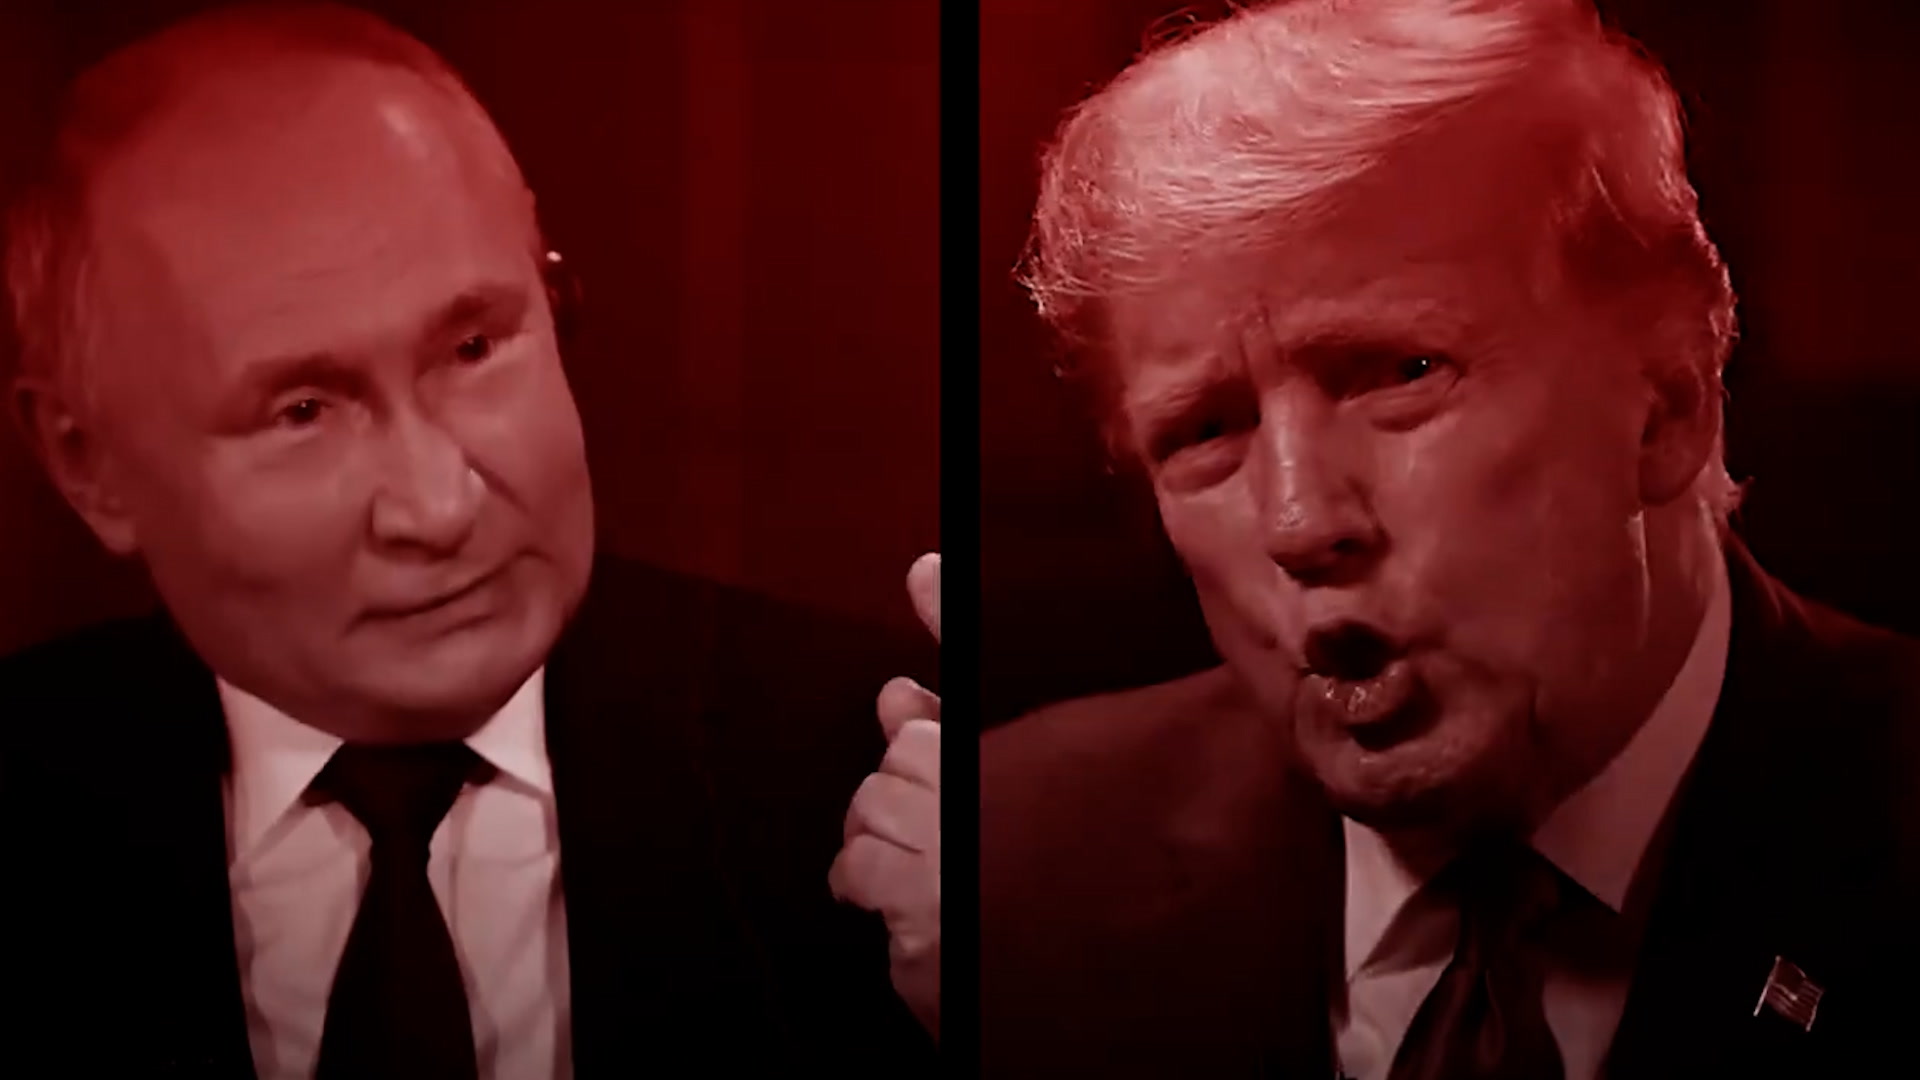 📺 Lincoln Project launches new ad comparing Trump and Putin after Navalny death (independent.co.uk)